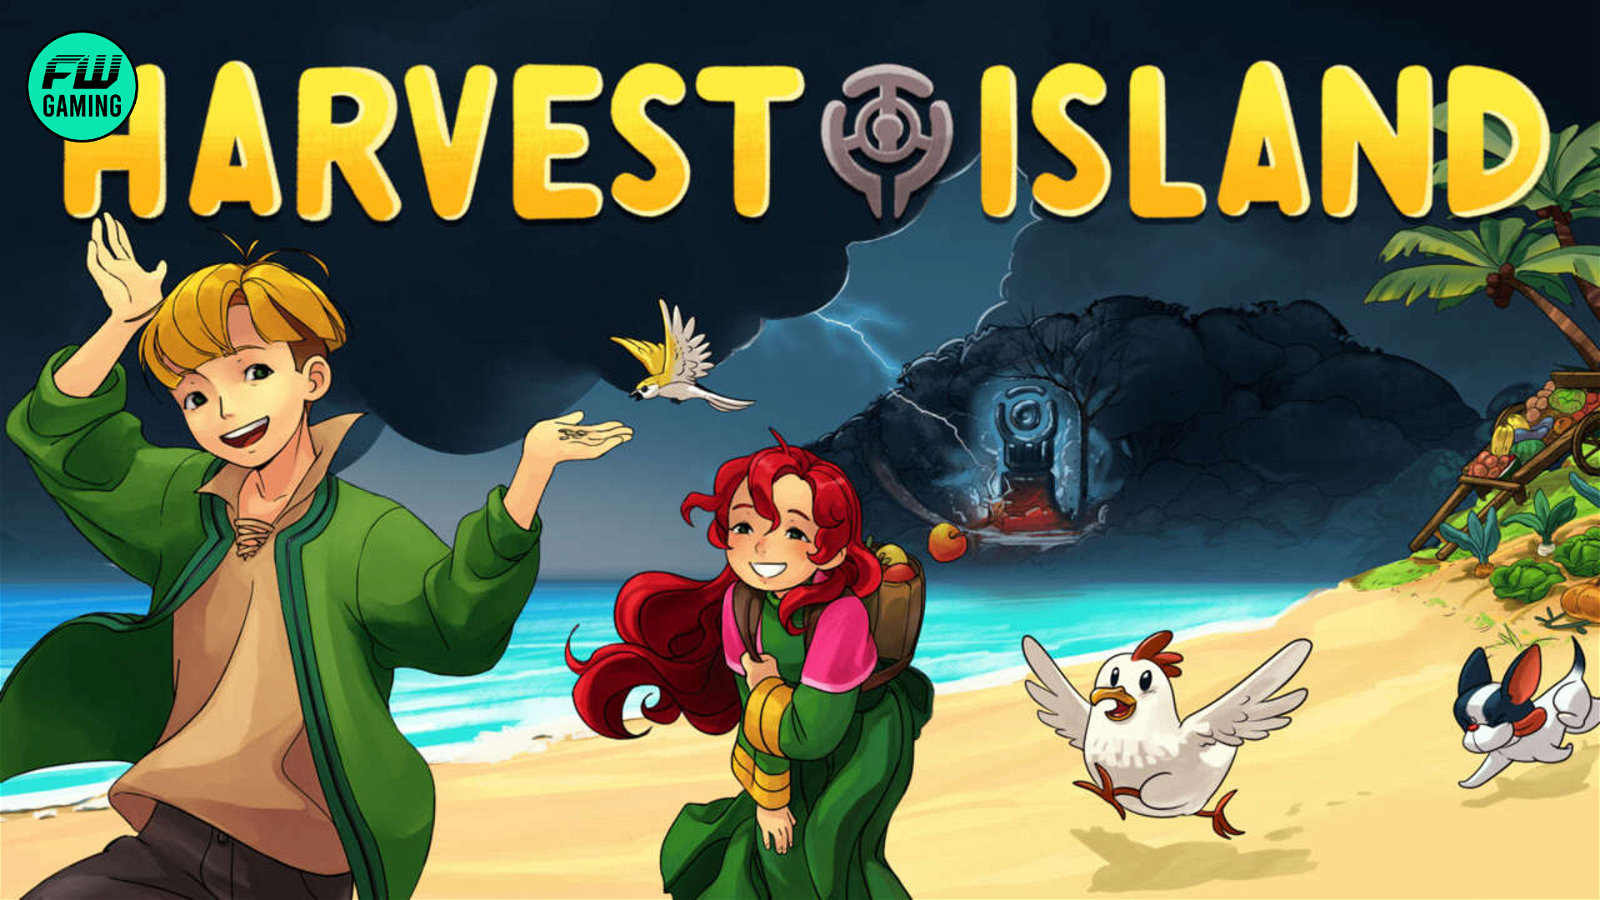 Yobob Games' Harvest Island might be another perfect game for Halloween!